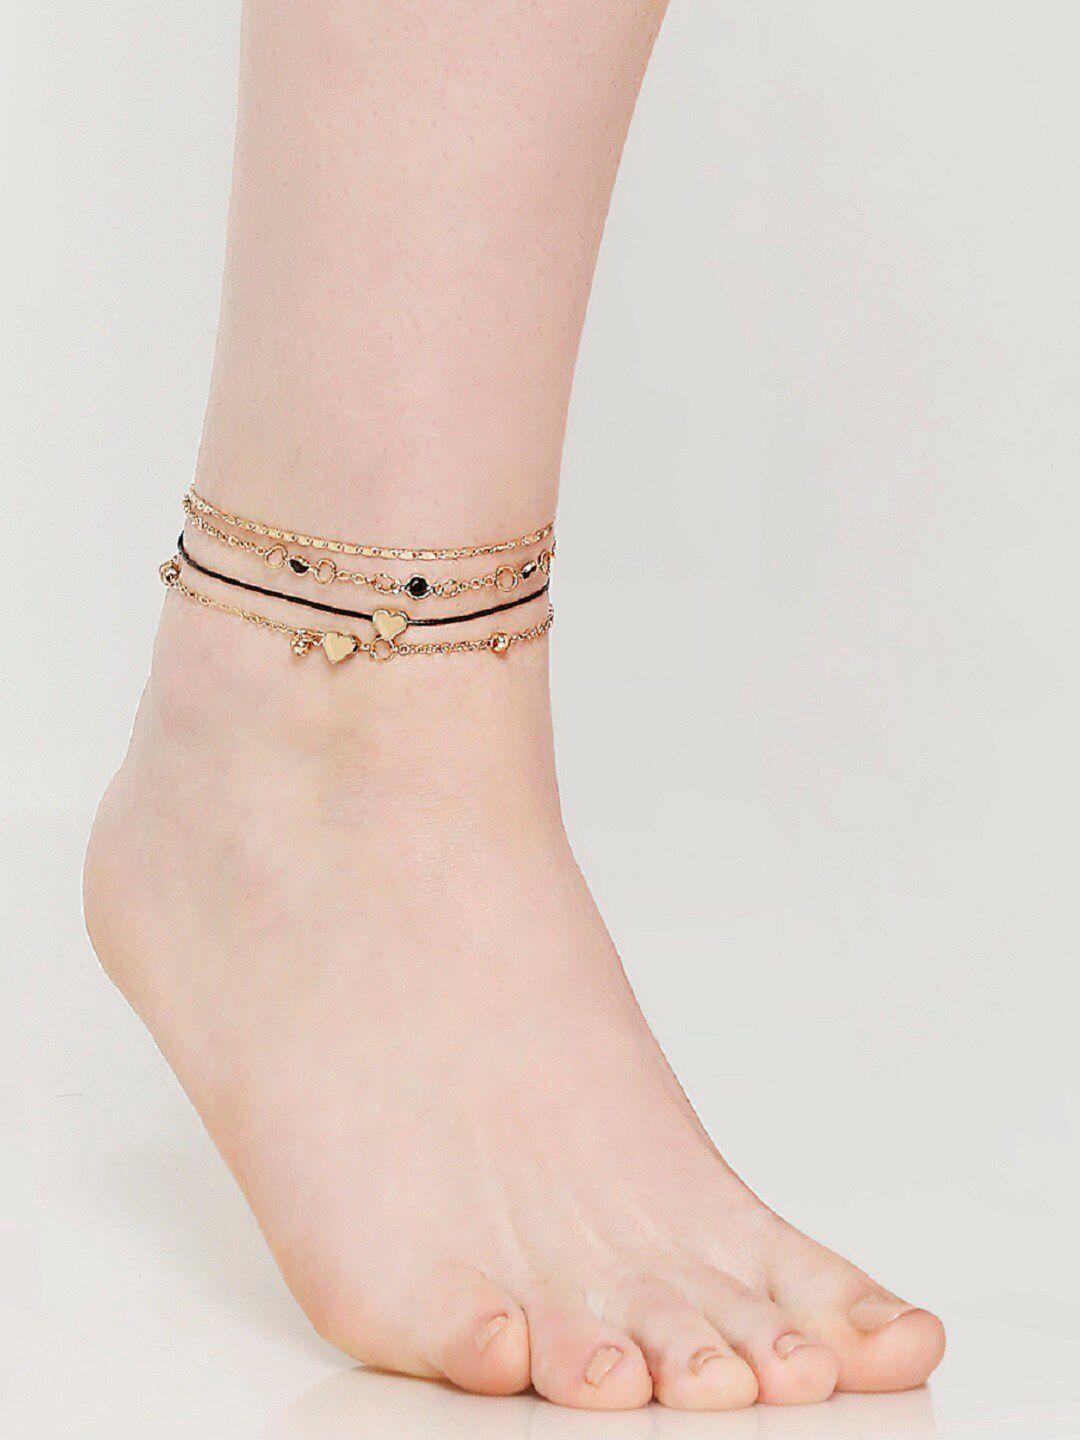 oomph set of 4 gold-toned & black delicate anklets